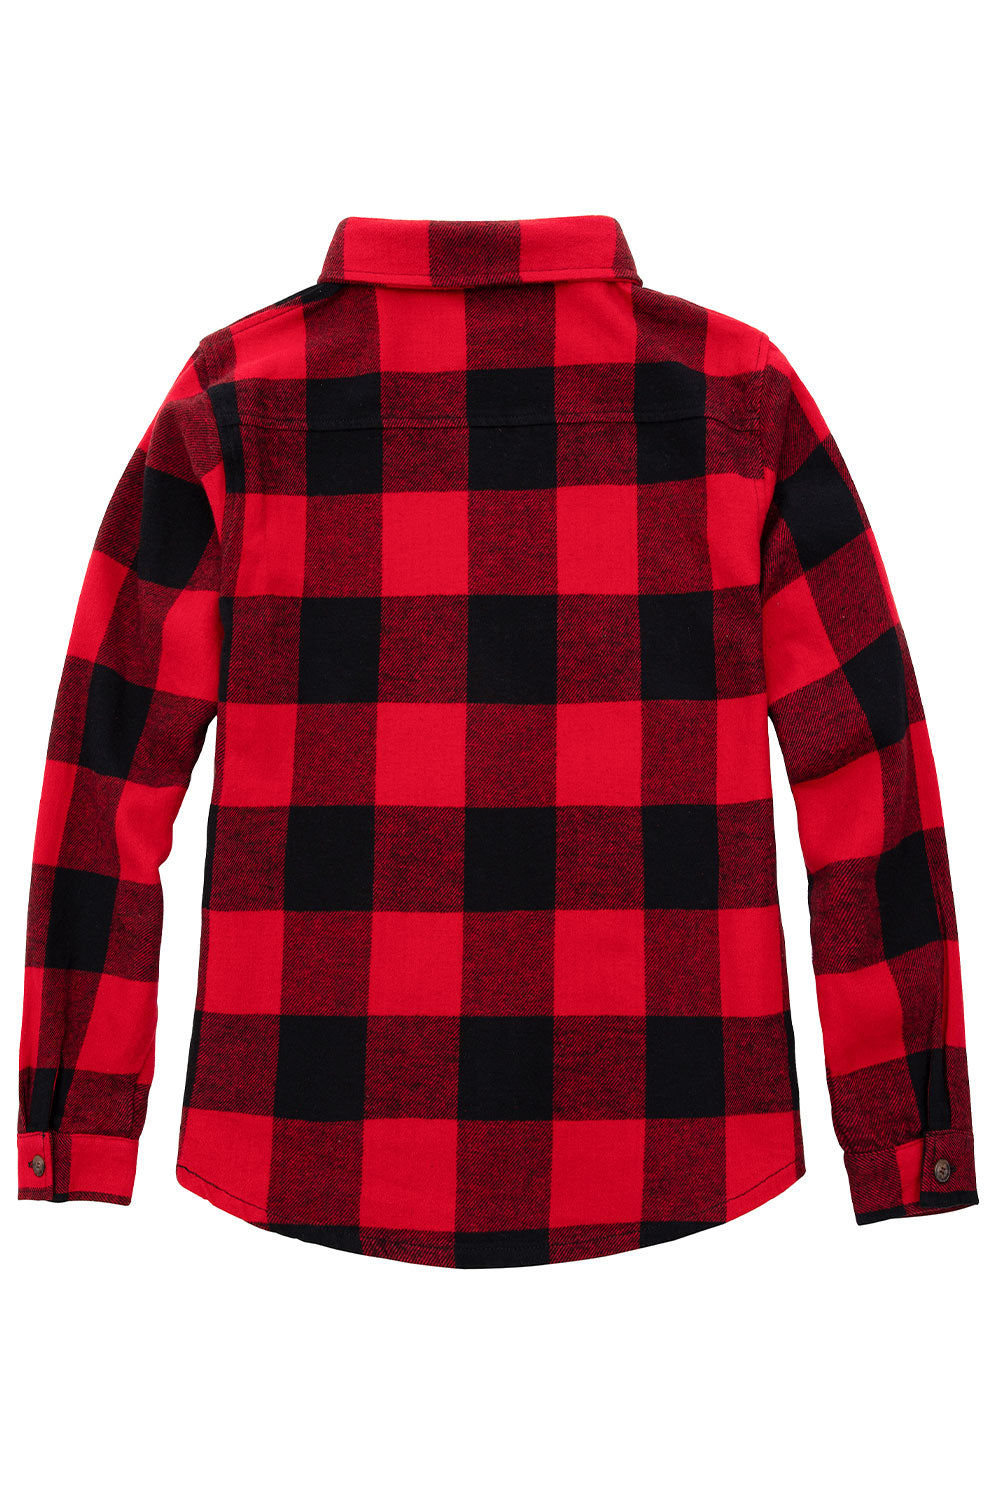 Women's Heritage Brushed Plaid Flannel Shirt,Heavyweight Cotton